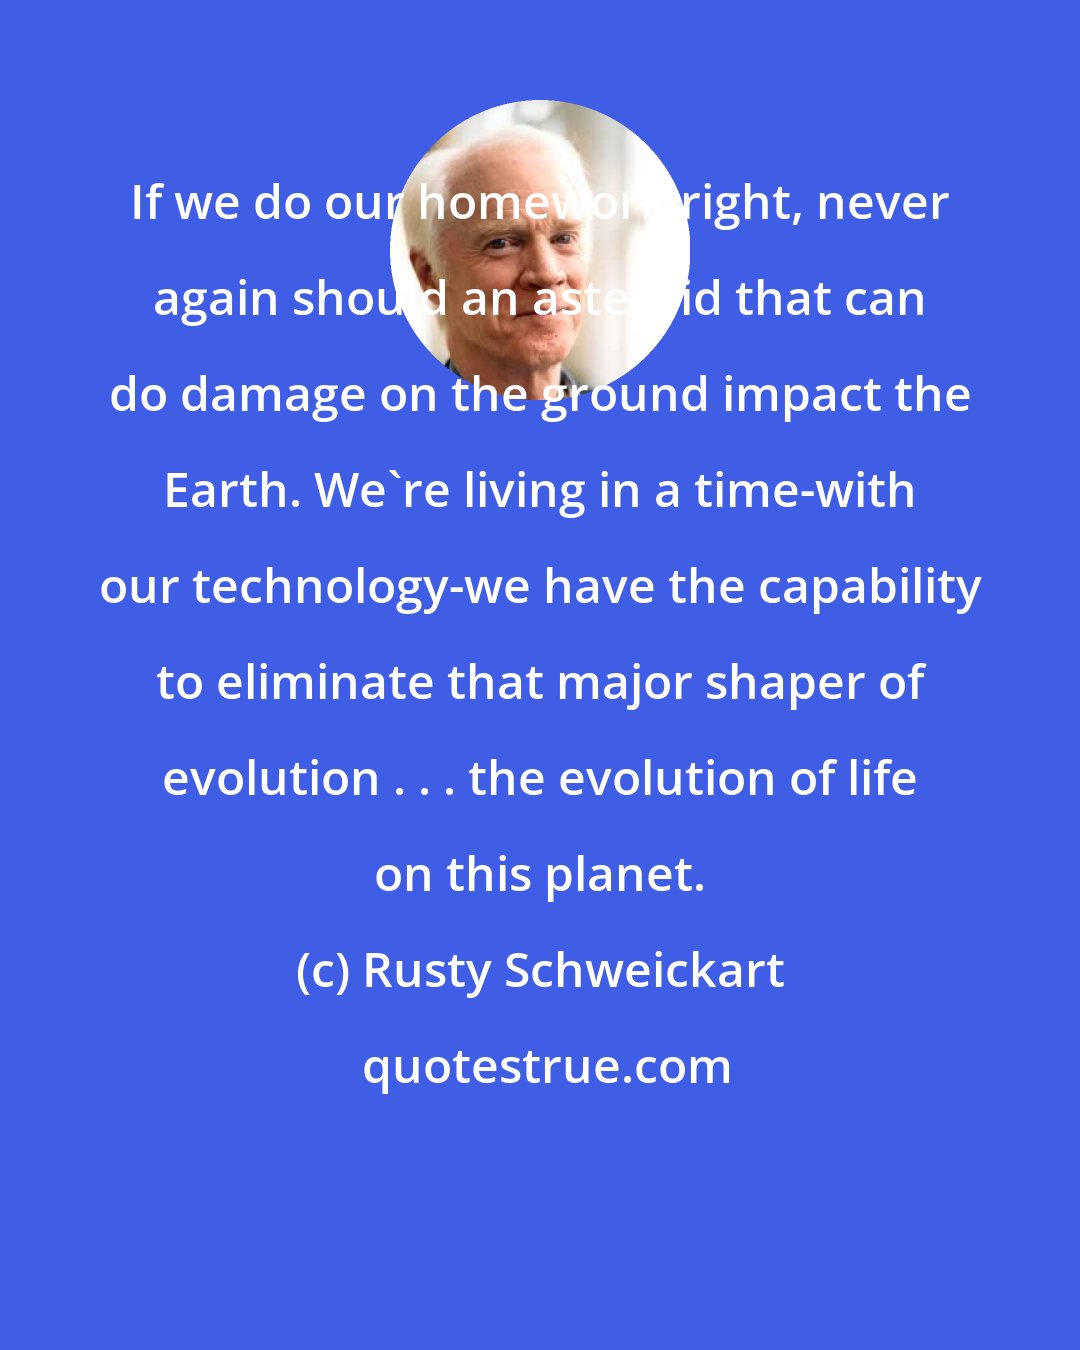 Rusty Schweickart: If we do our homework right, never again should an asteroid that can do damage on the ground impact the Earth. We're living in a time-with our technology-we have the capability to eliminate that major shaper of evolution . . . the evolution of life on this planet.